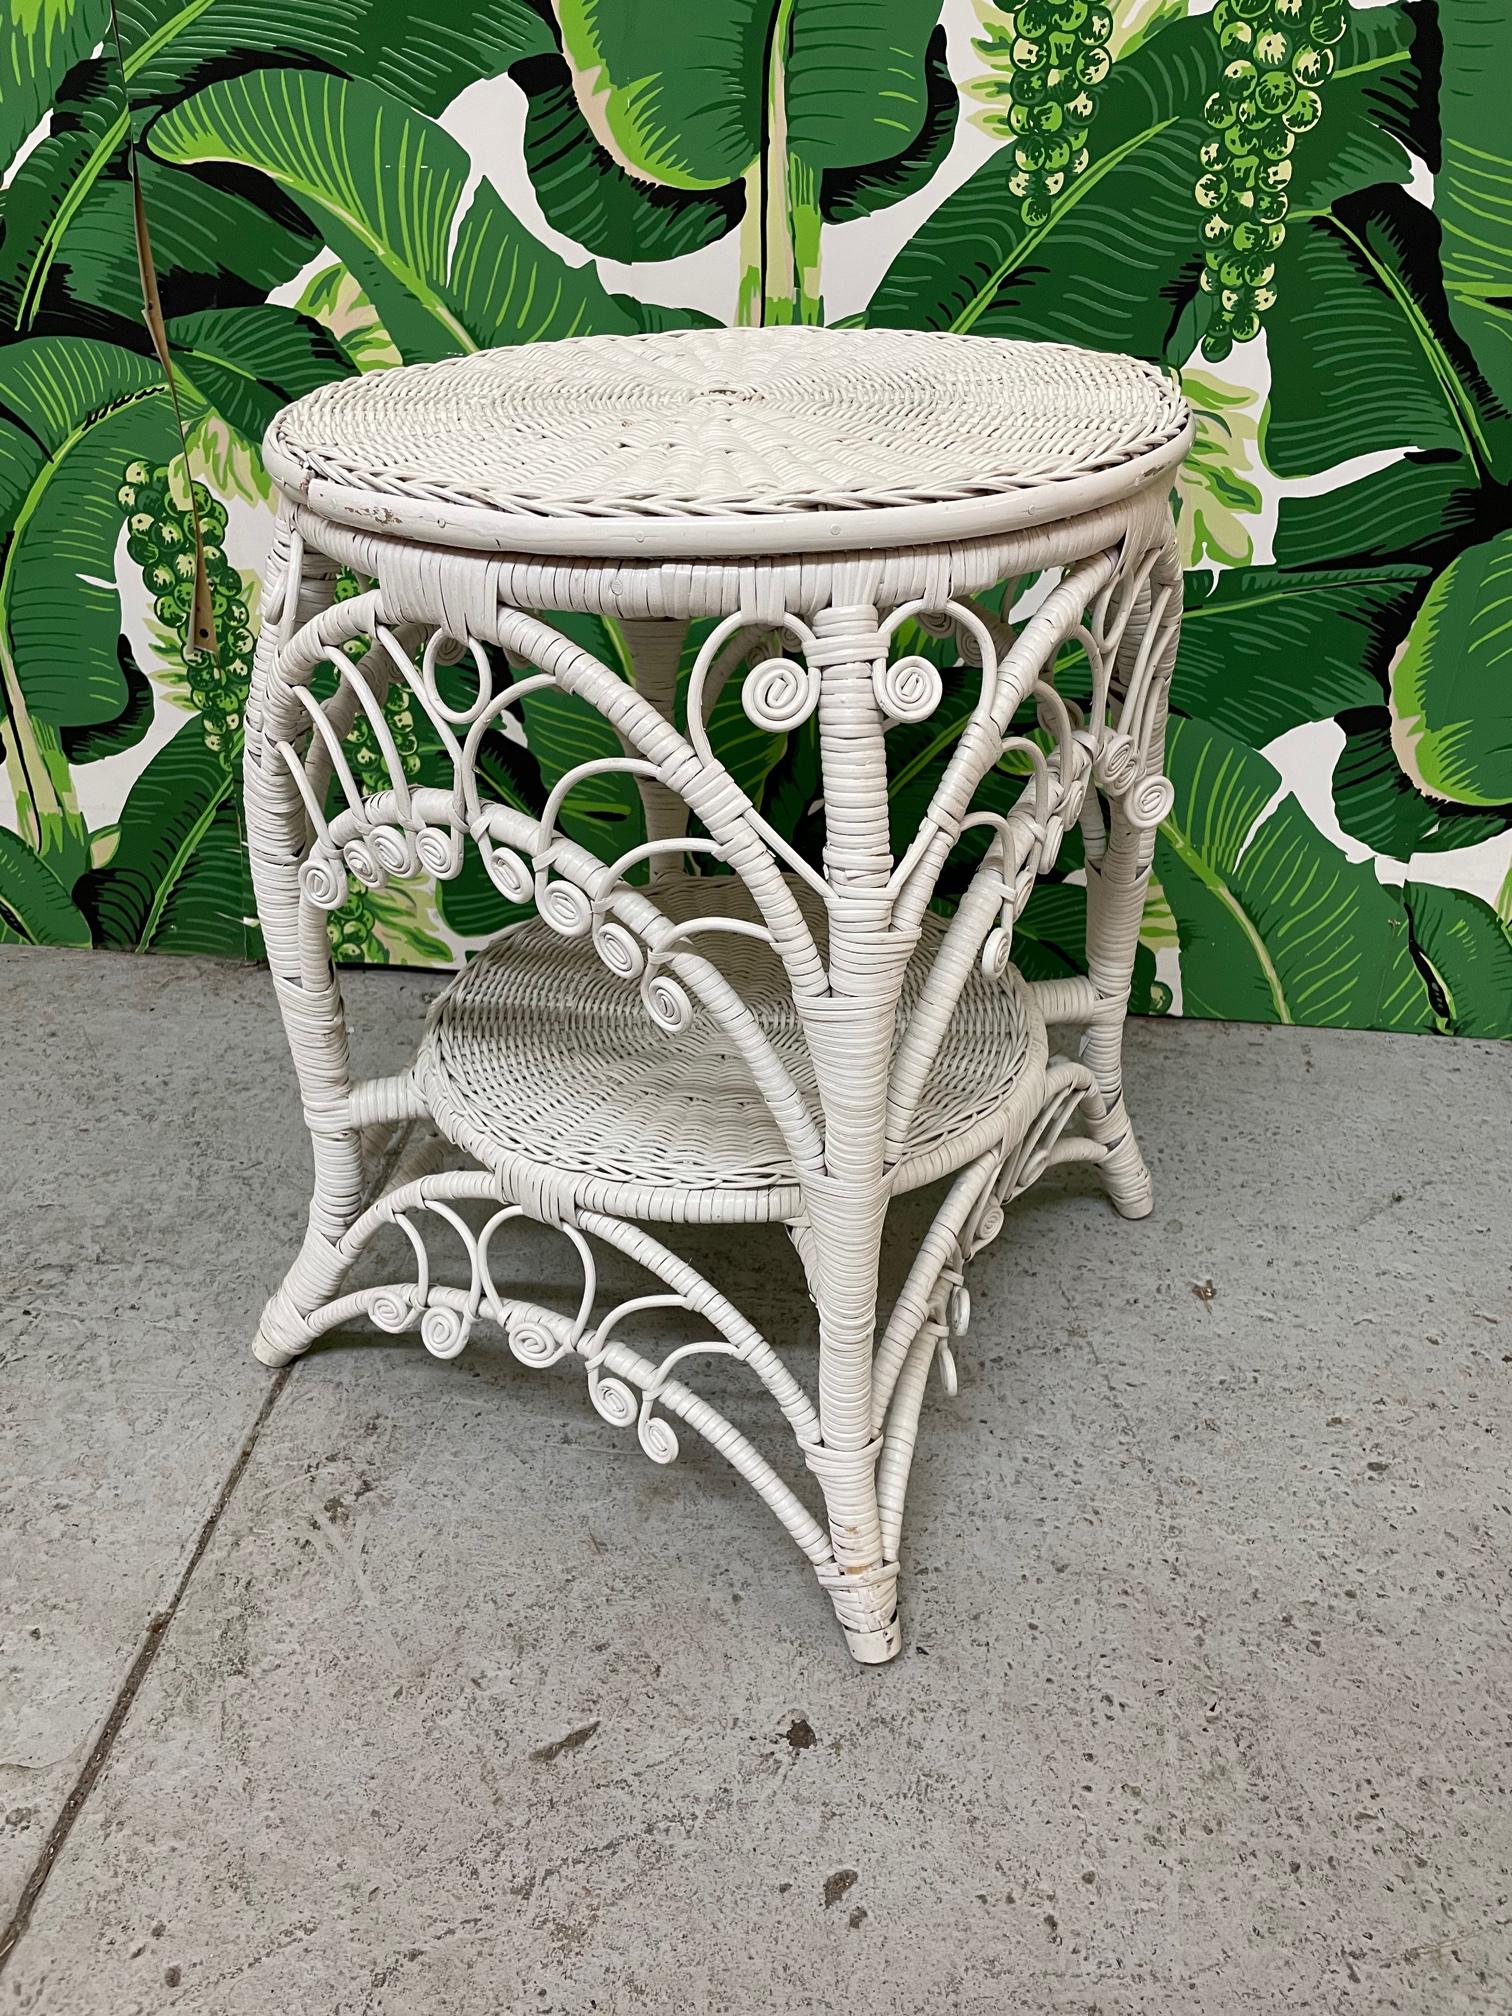 Vintage fiddlehead wicker side/end table features woven top and ornate scrolled and filigree aprons. Rattan wrapped frame and splayed legs. In the manner of Heywood-Wakefield. Good condition with imperfections consistent with age, see photos for